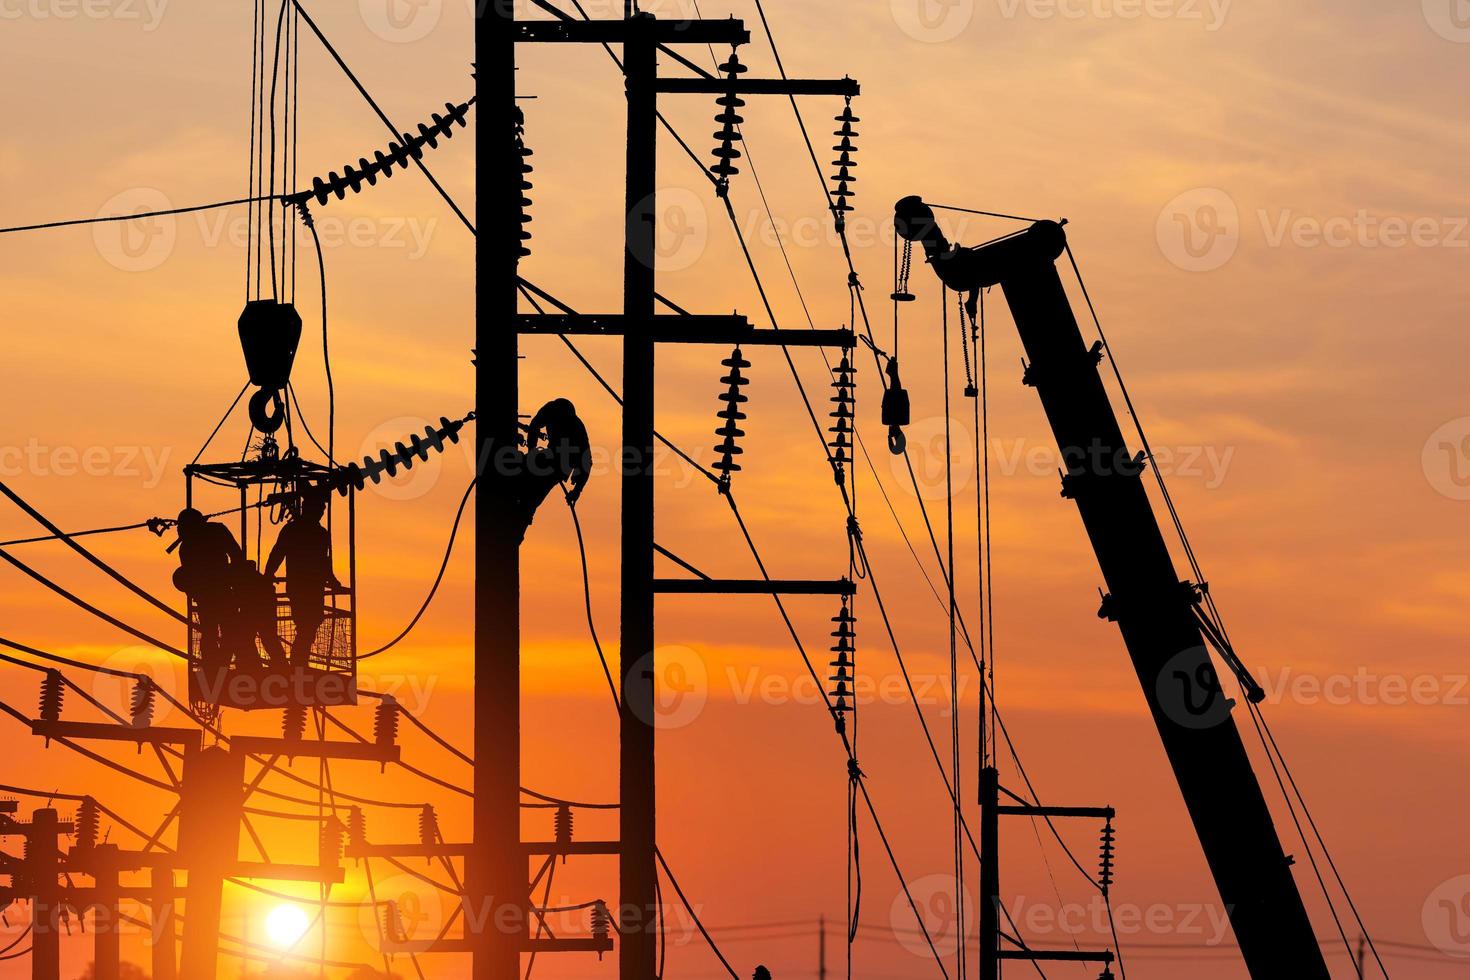 Silhouetted electrician team working on poles to install high-voltage equipment, Silhouette electrician on electric power pole with blurred sunset sky background photo